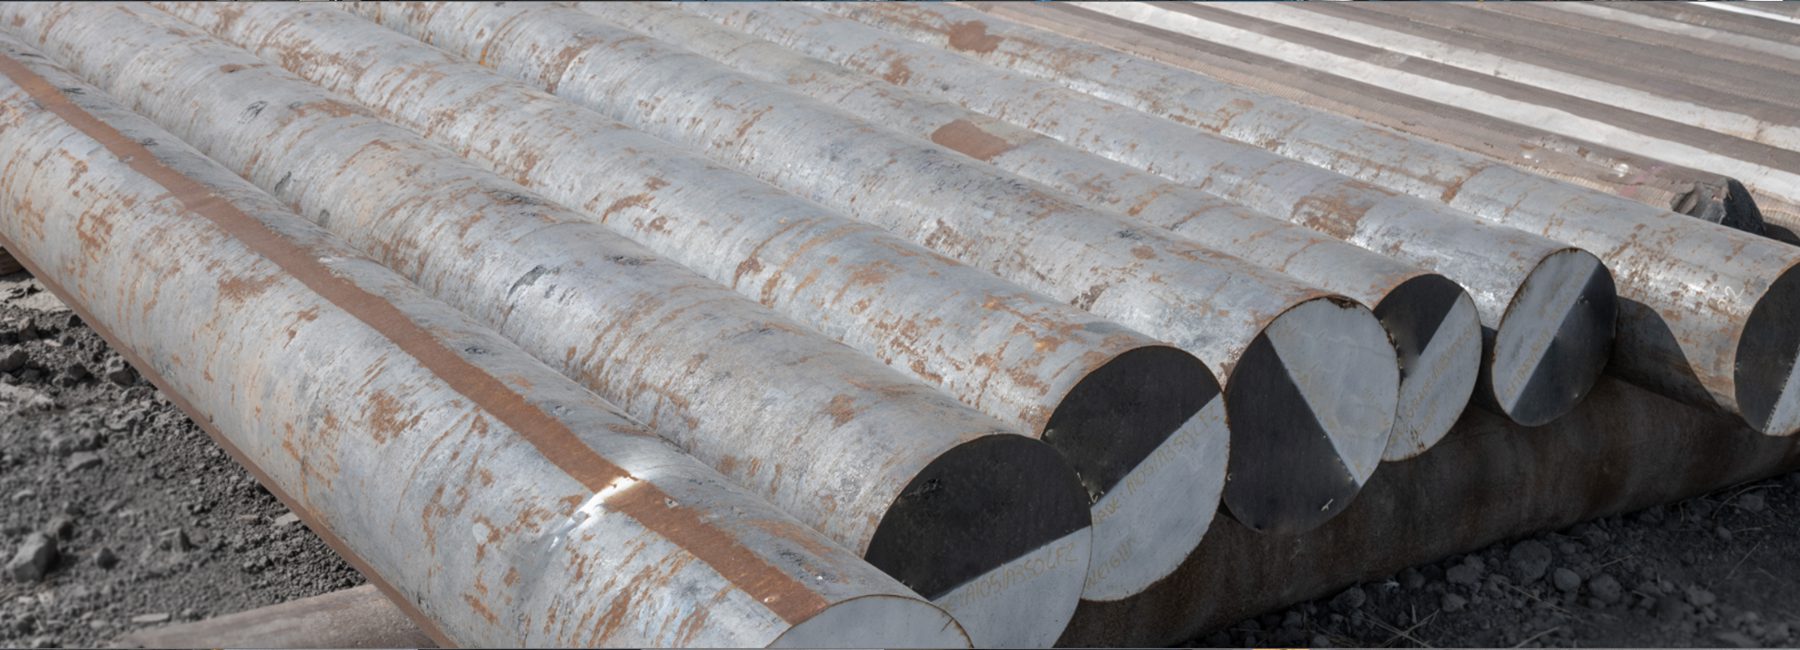 Stacked large metal pipes with rust spots on a gravel surface.